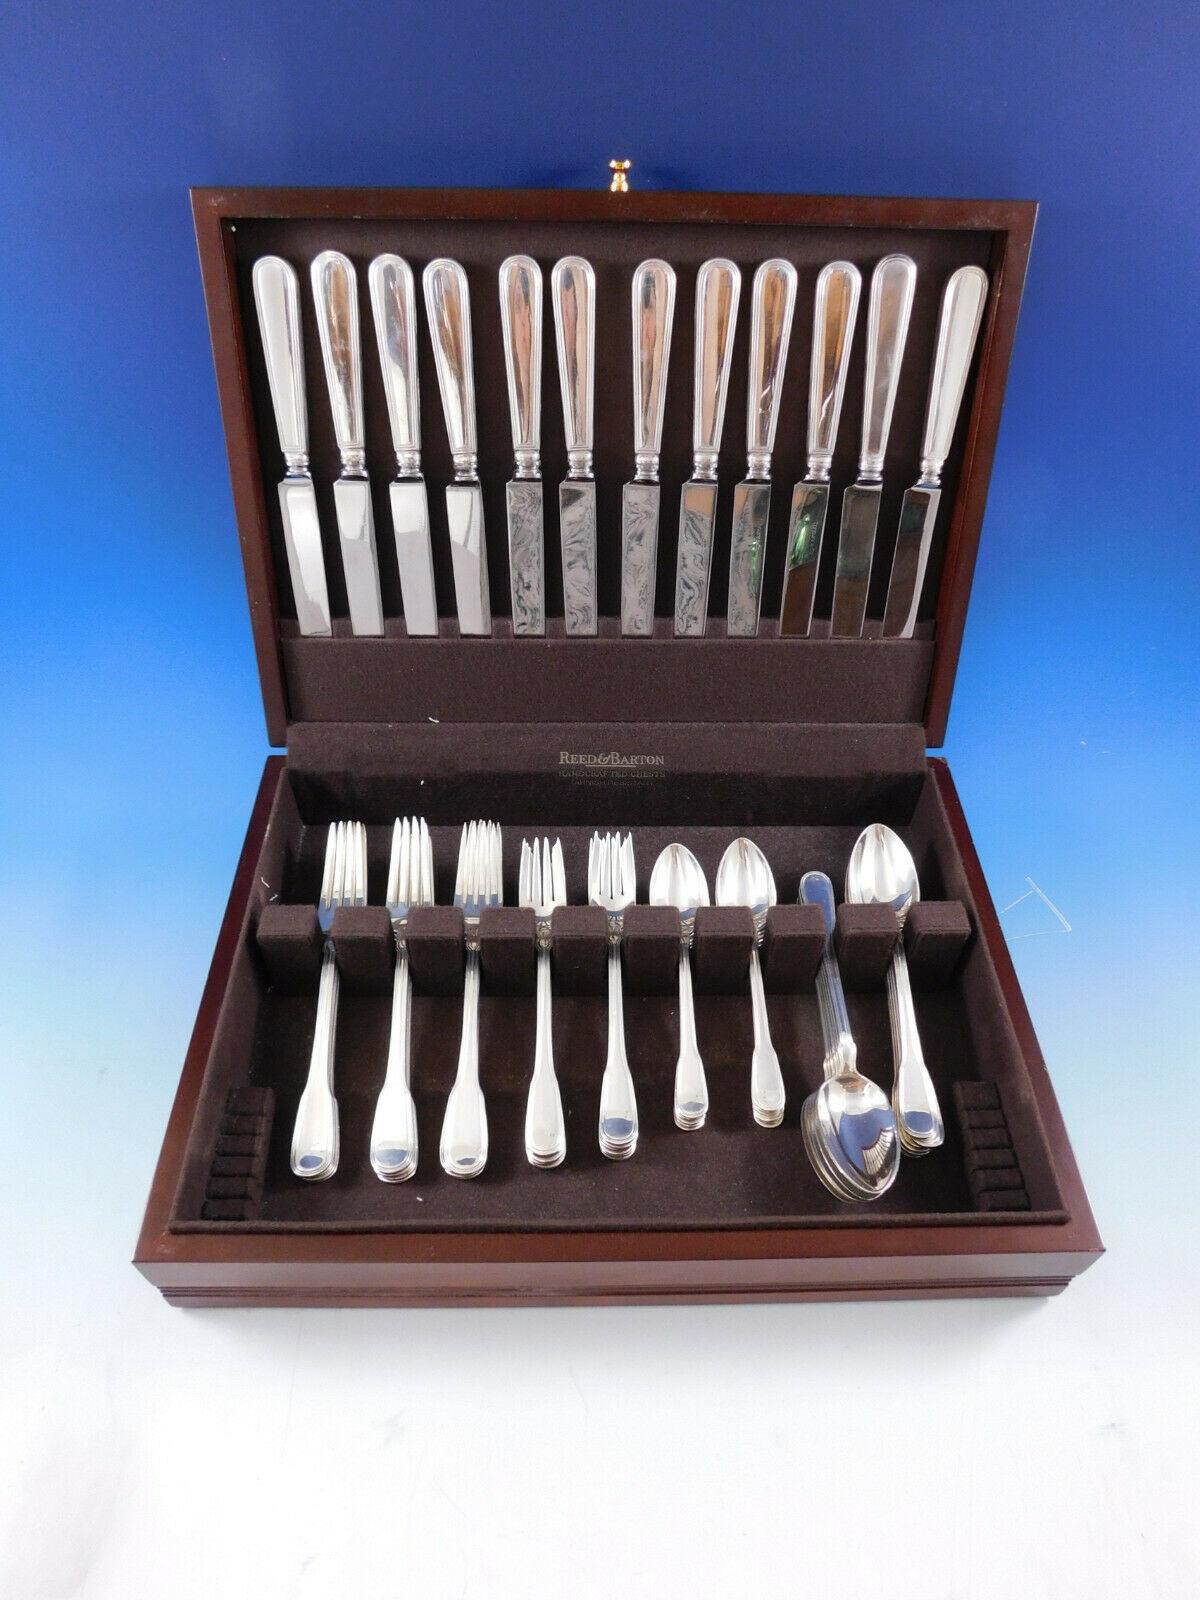 Superb sinner size Hamilton aka Gramercy by Tiffany & Co. sterling silver Flatware set, 60 pieces. This timeless pattern was introduced by Tiffany in the year 1938. This set includes:

12 large dinner size knives, 10